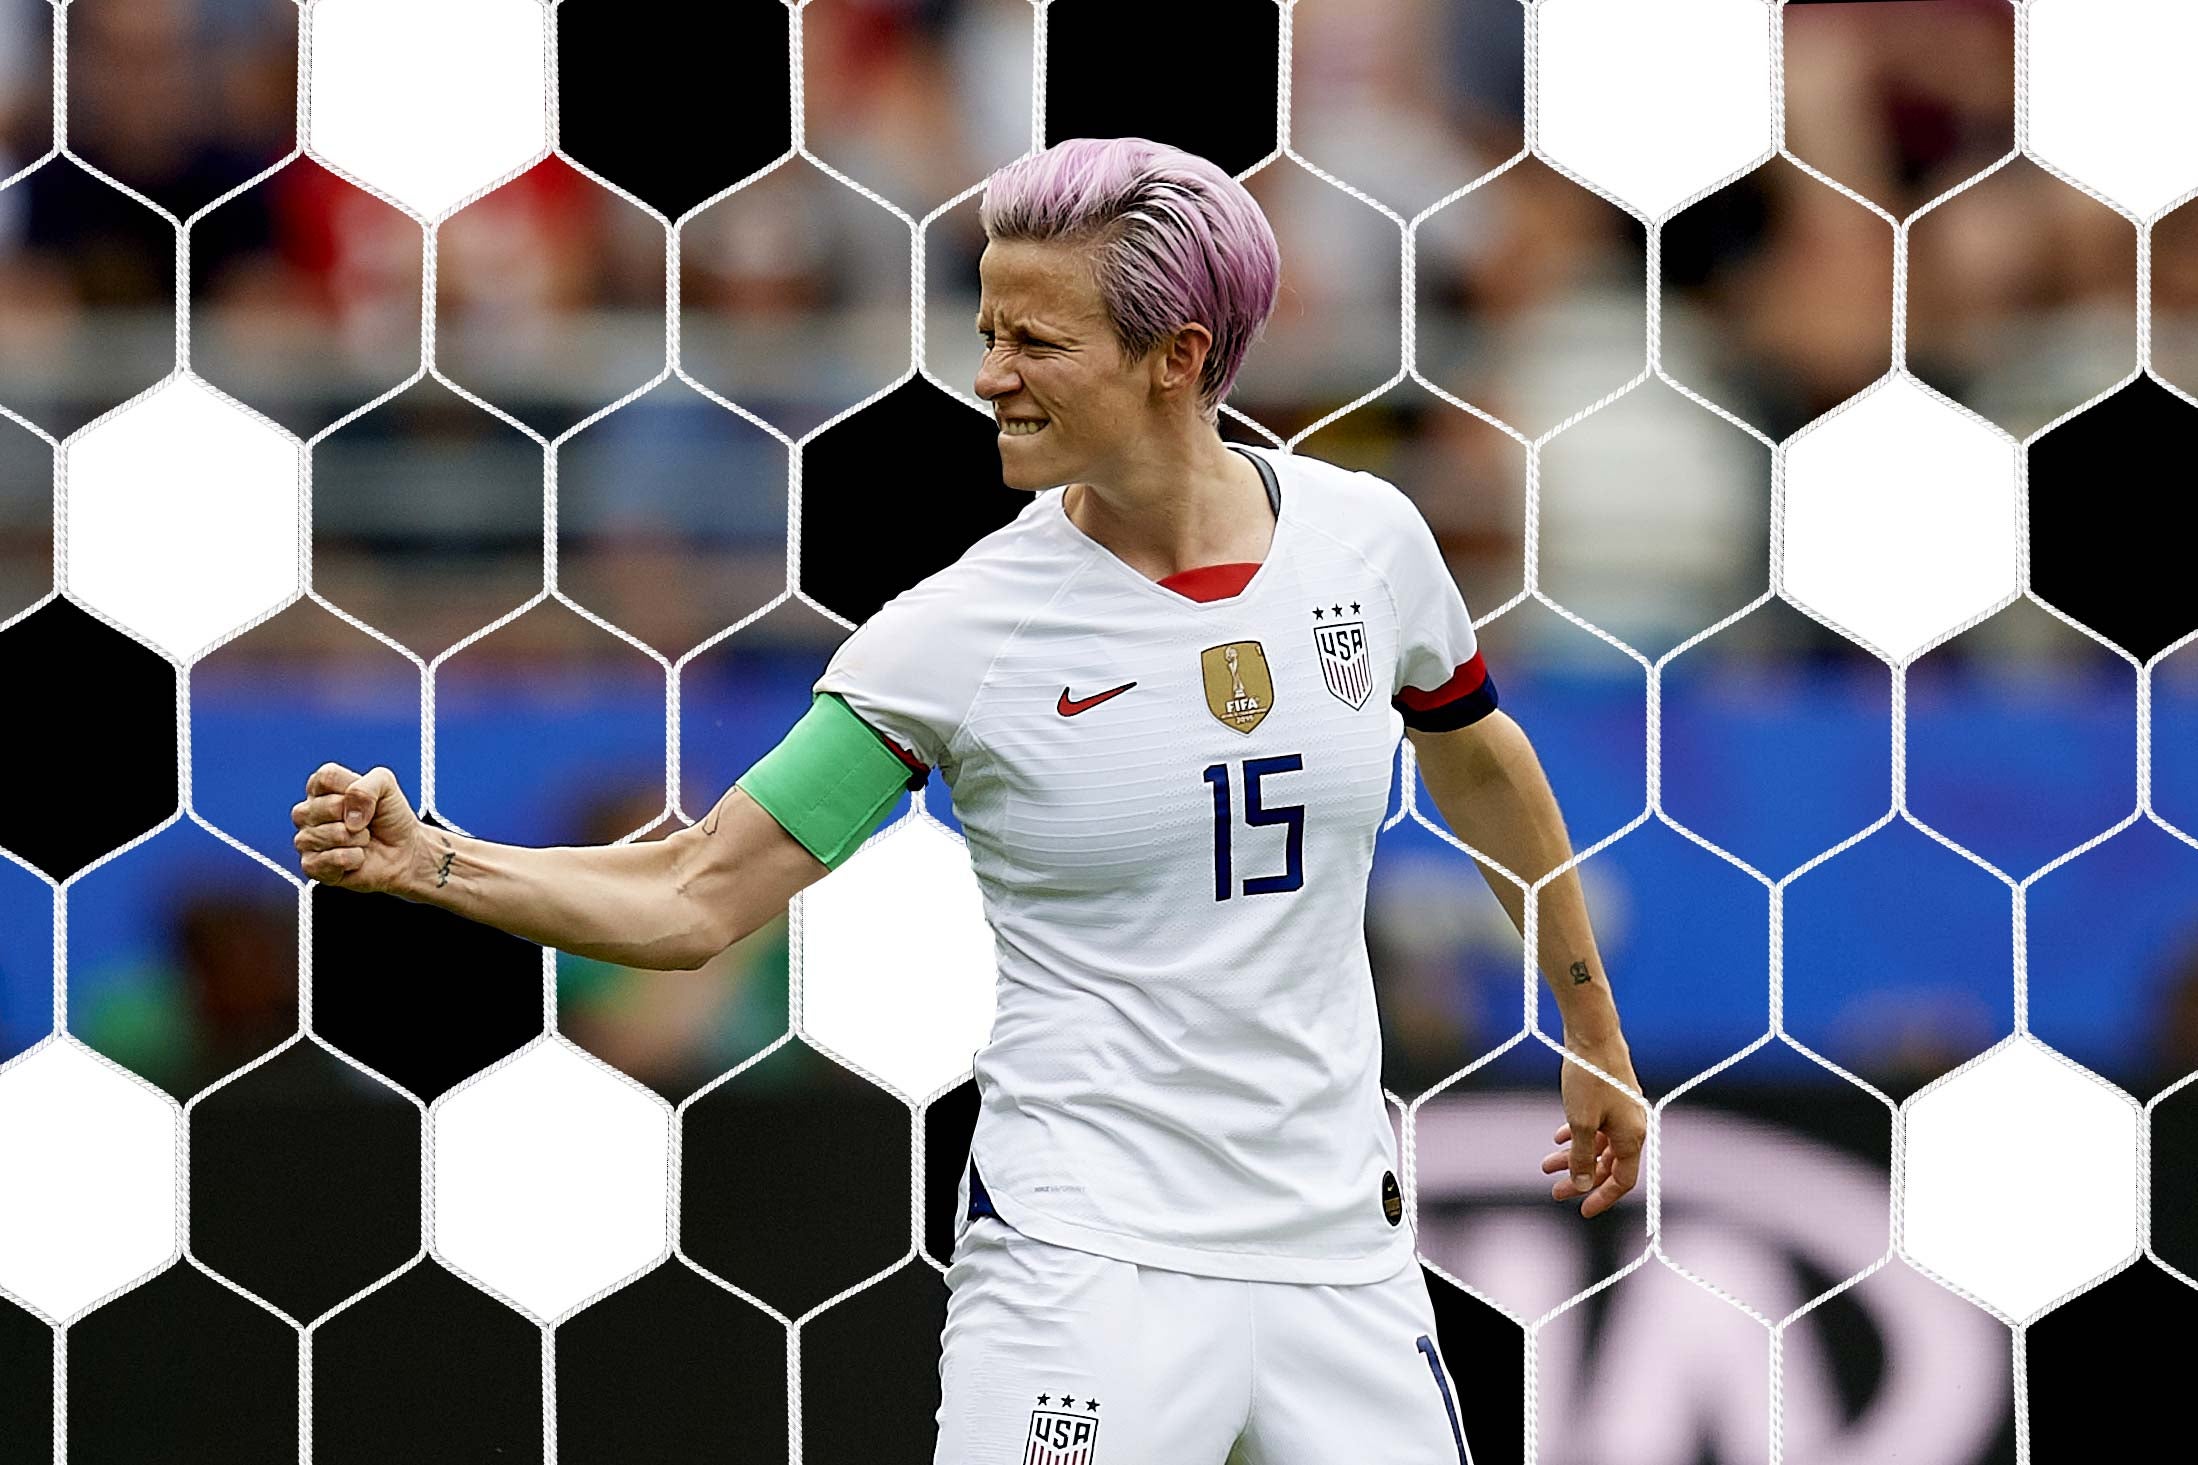 Megan Rapinoe as seen on June 24 during the Women's World Cup in Reims, France.